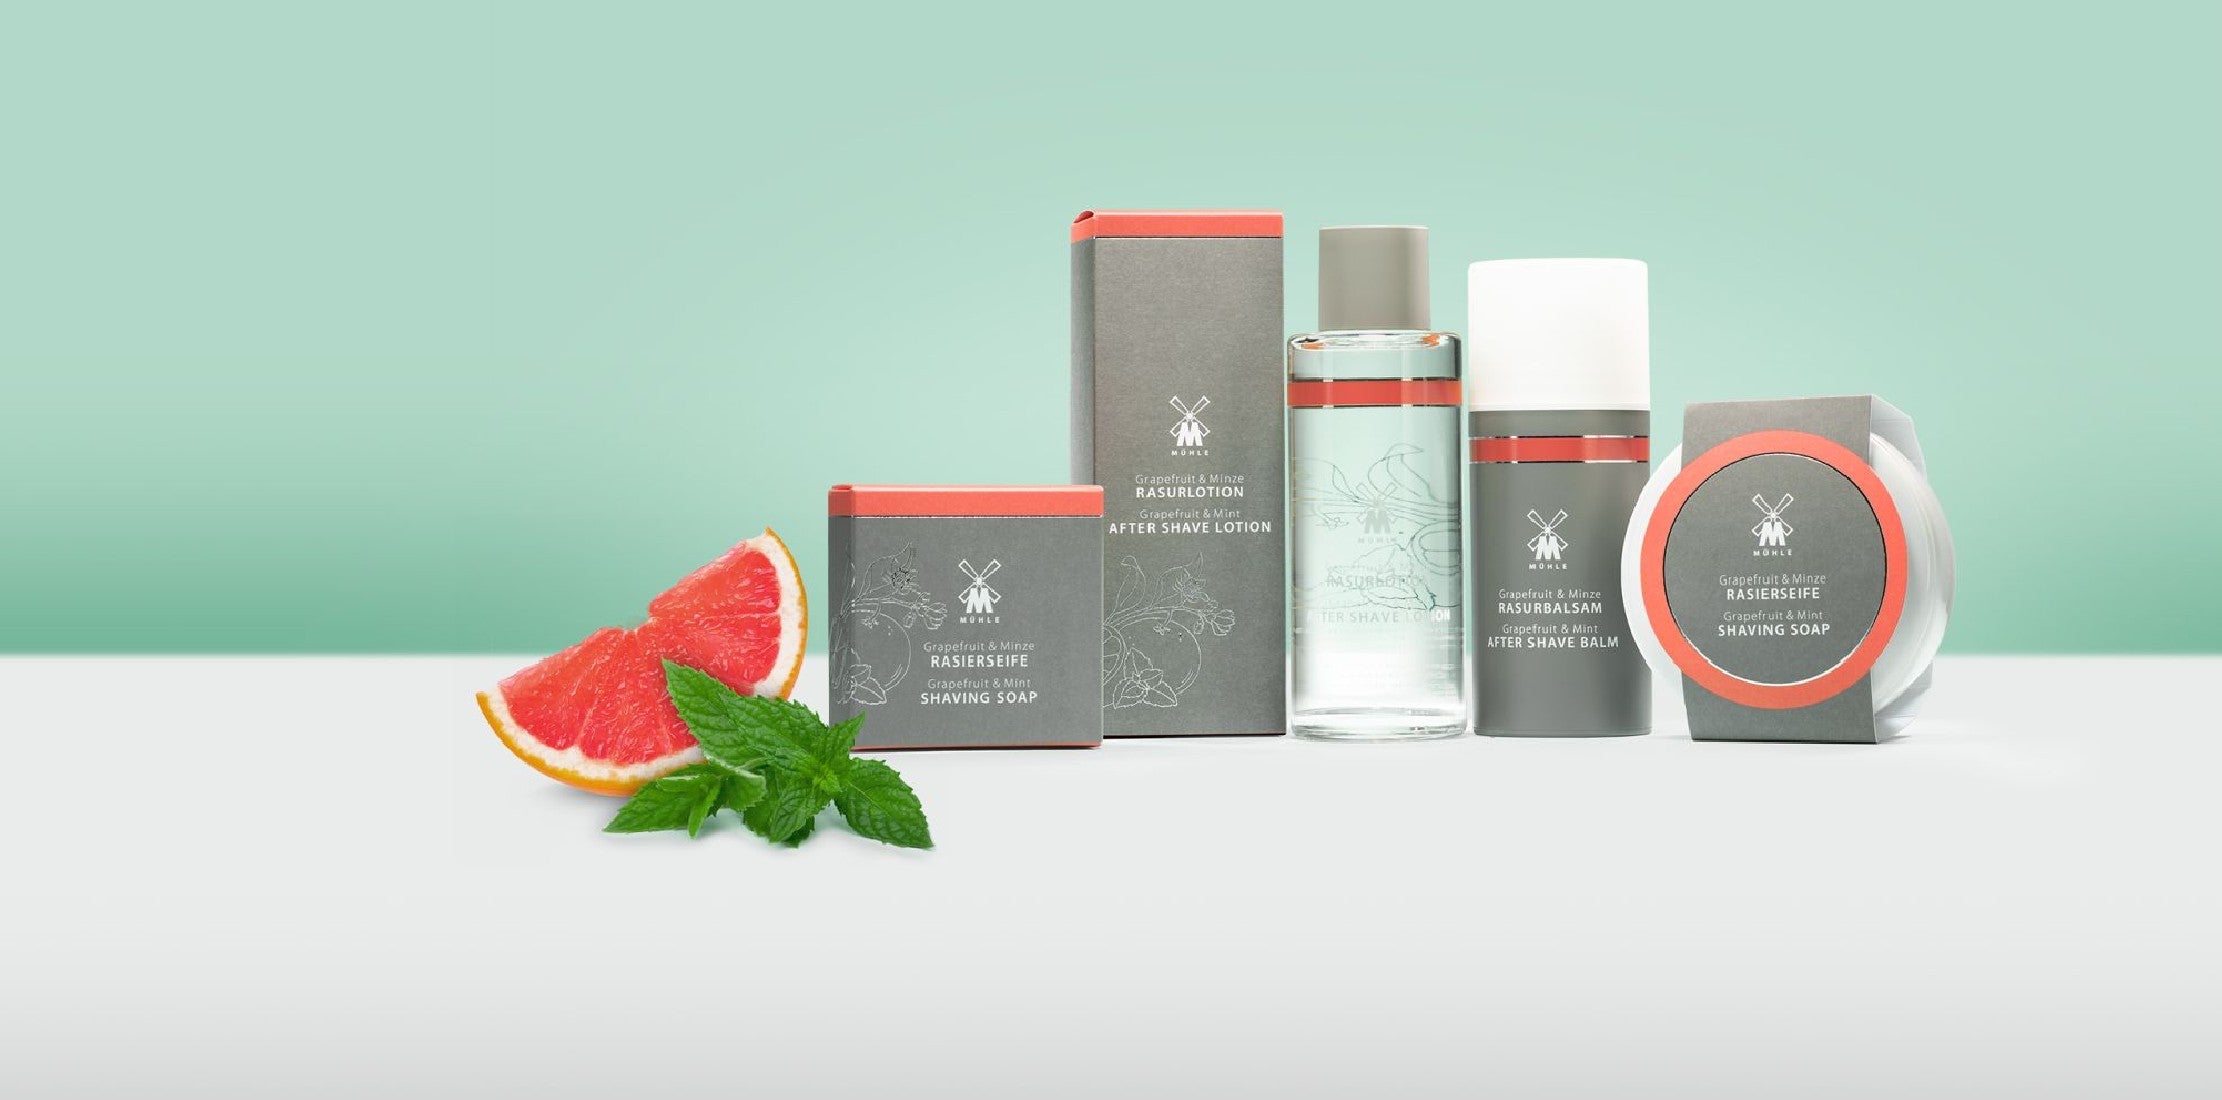 The New Grapefruit & Mint Collection